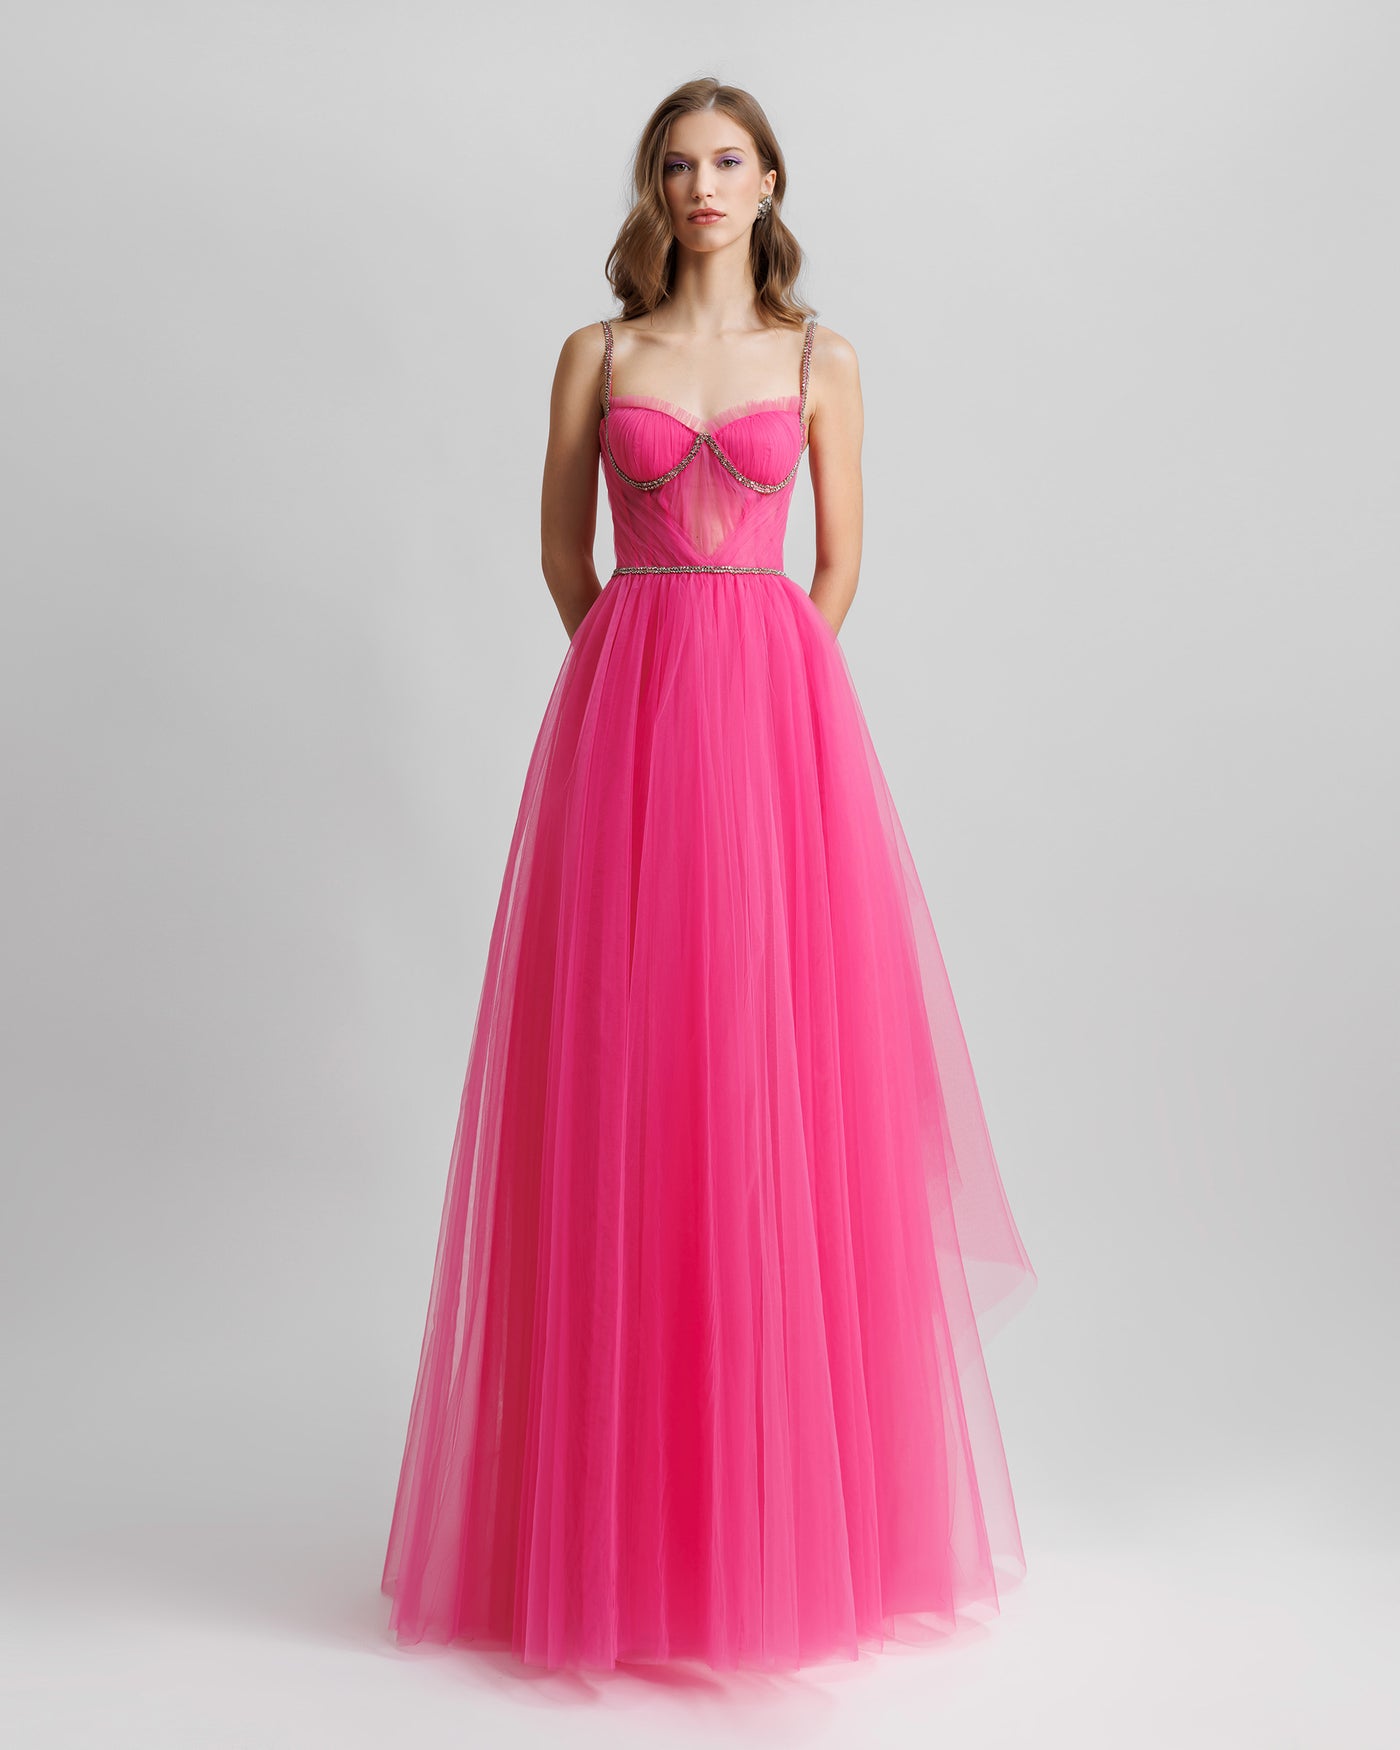 Corseted Tulle Dress